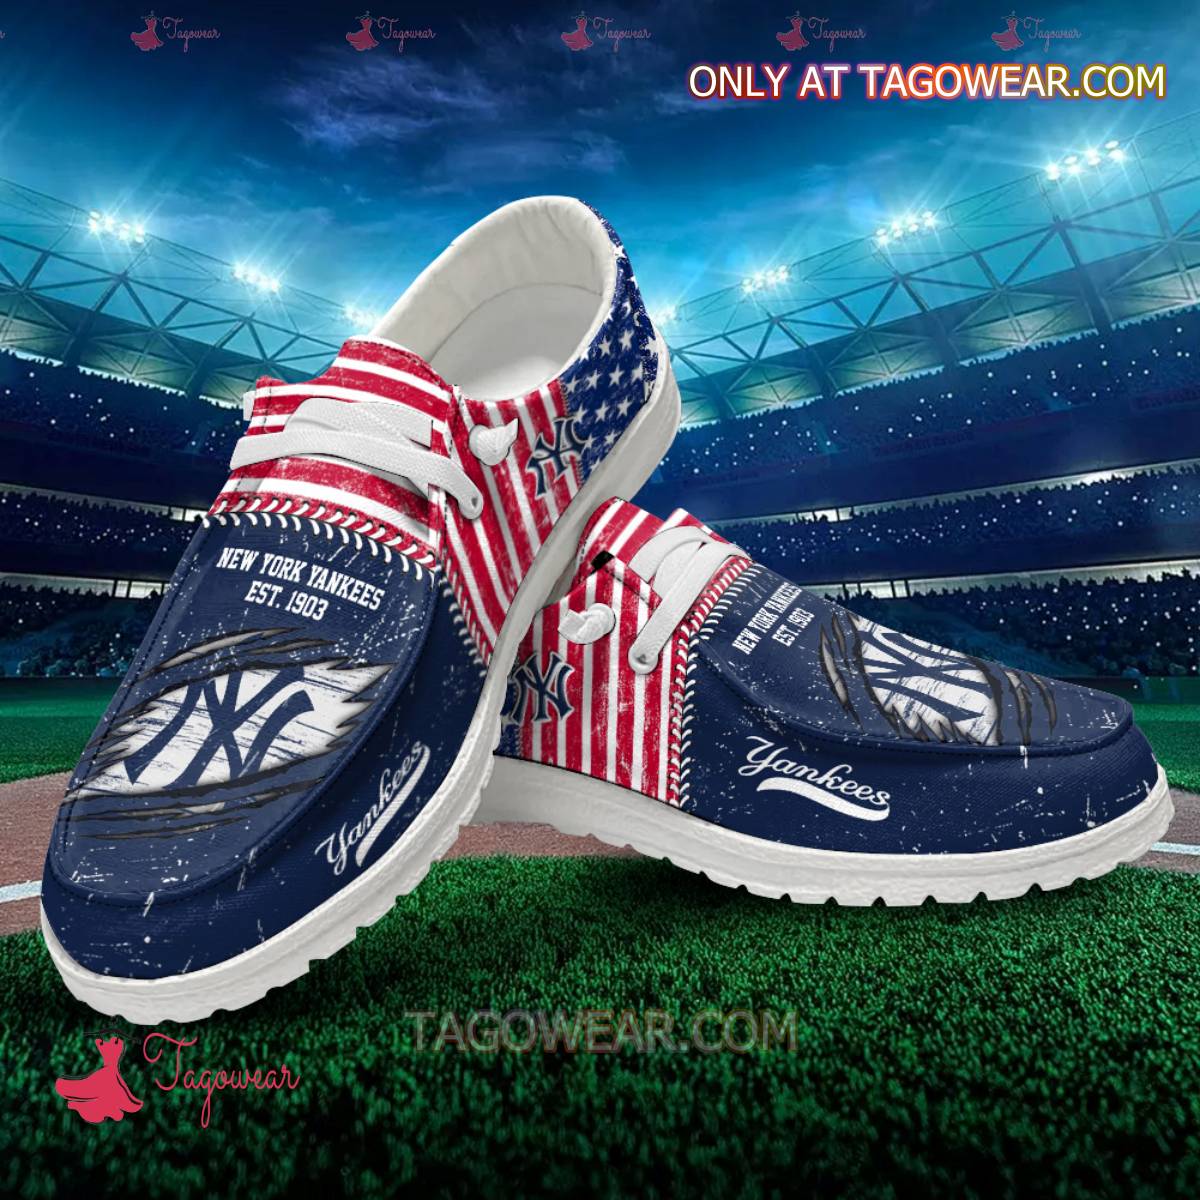 New York Yankees Est 1903 Hey Dude Shoes a